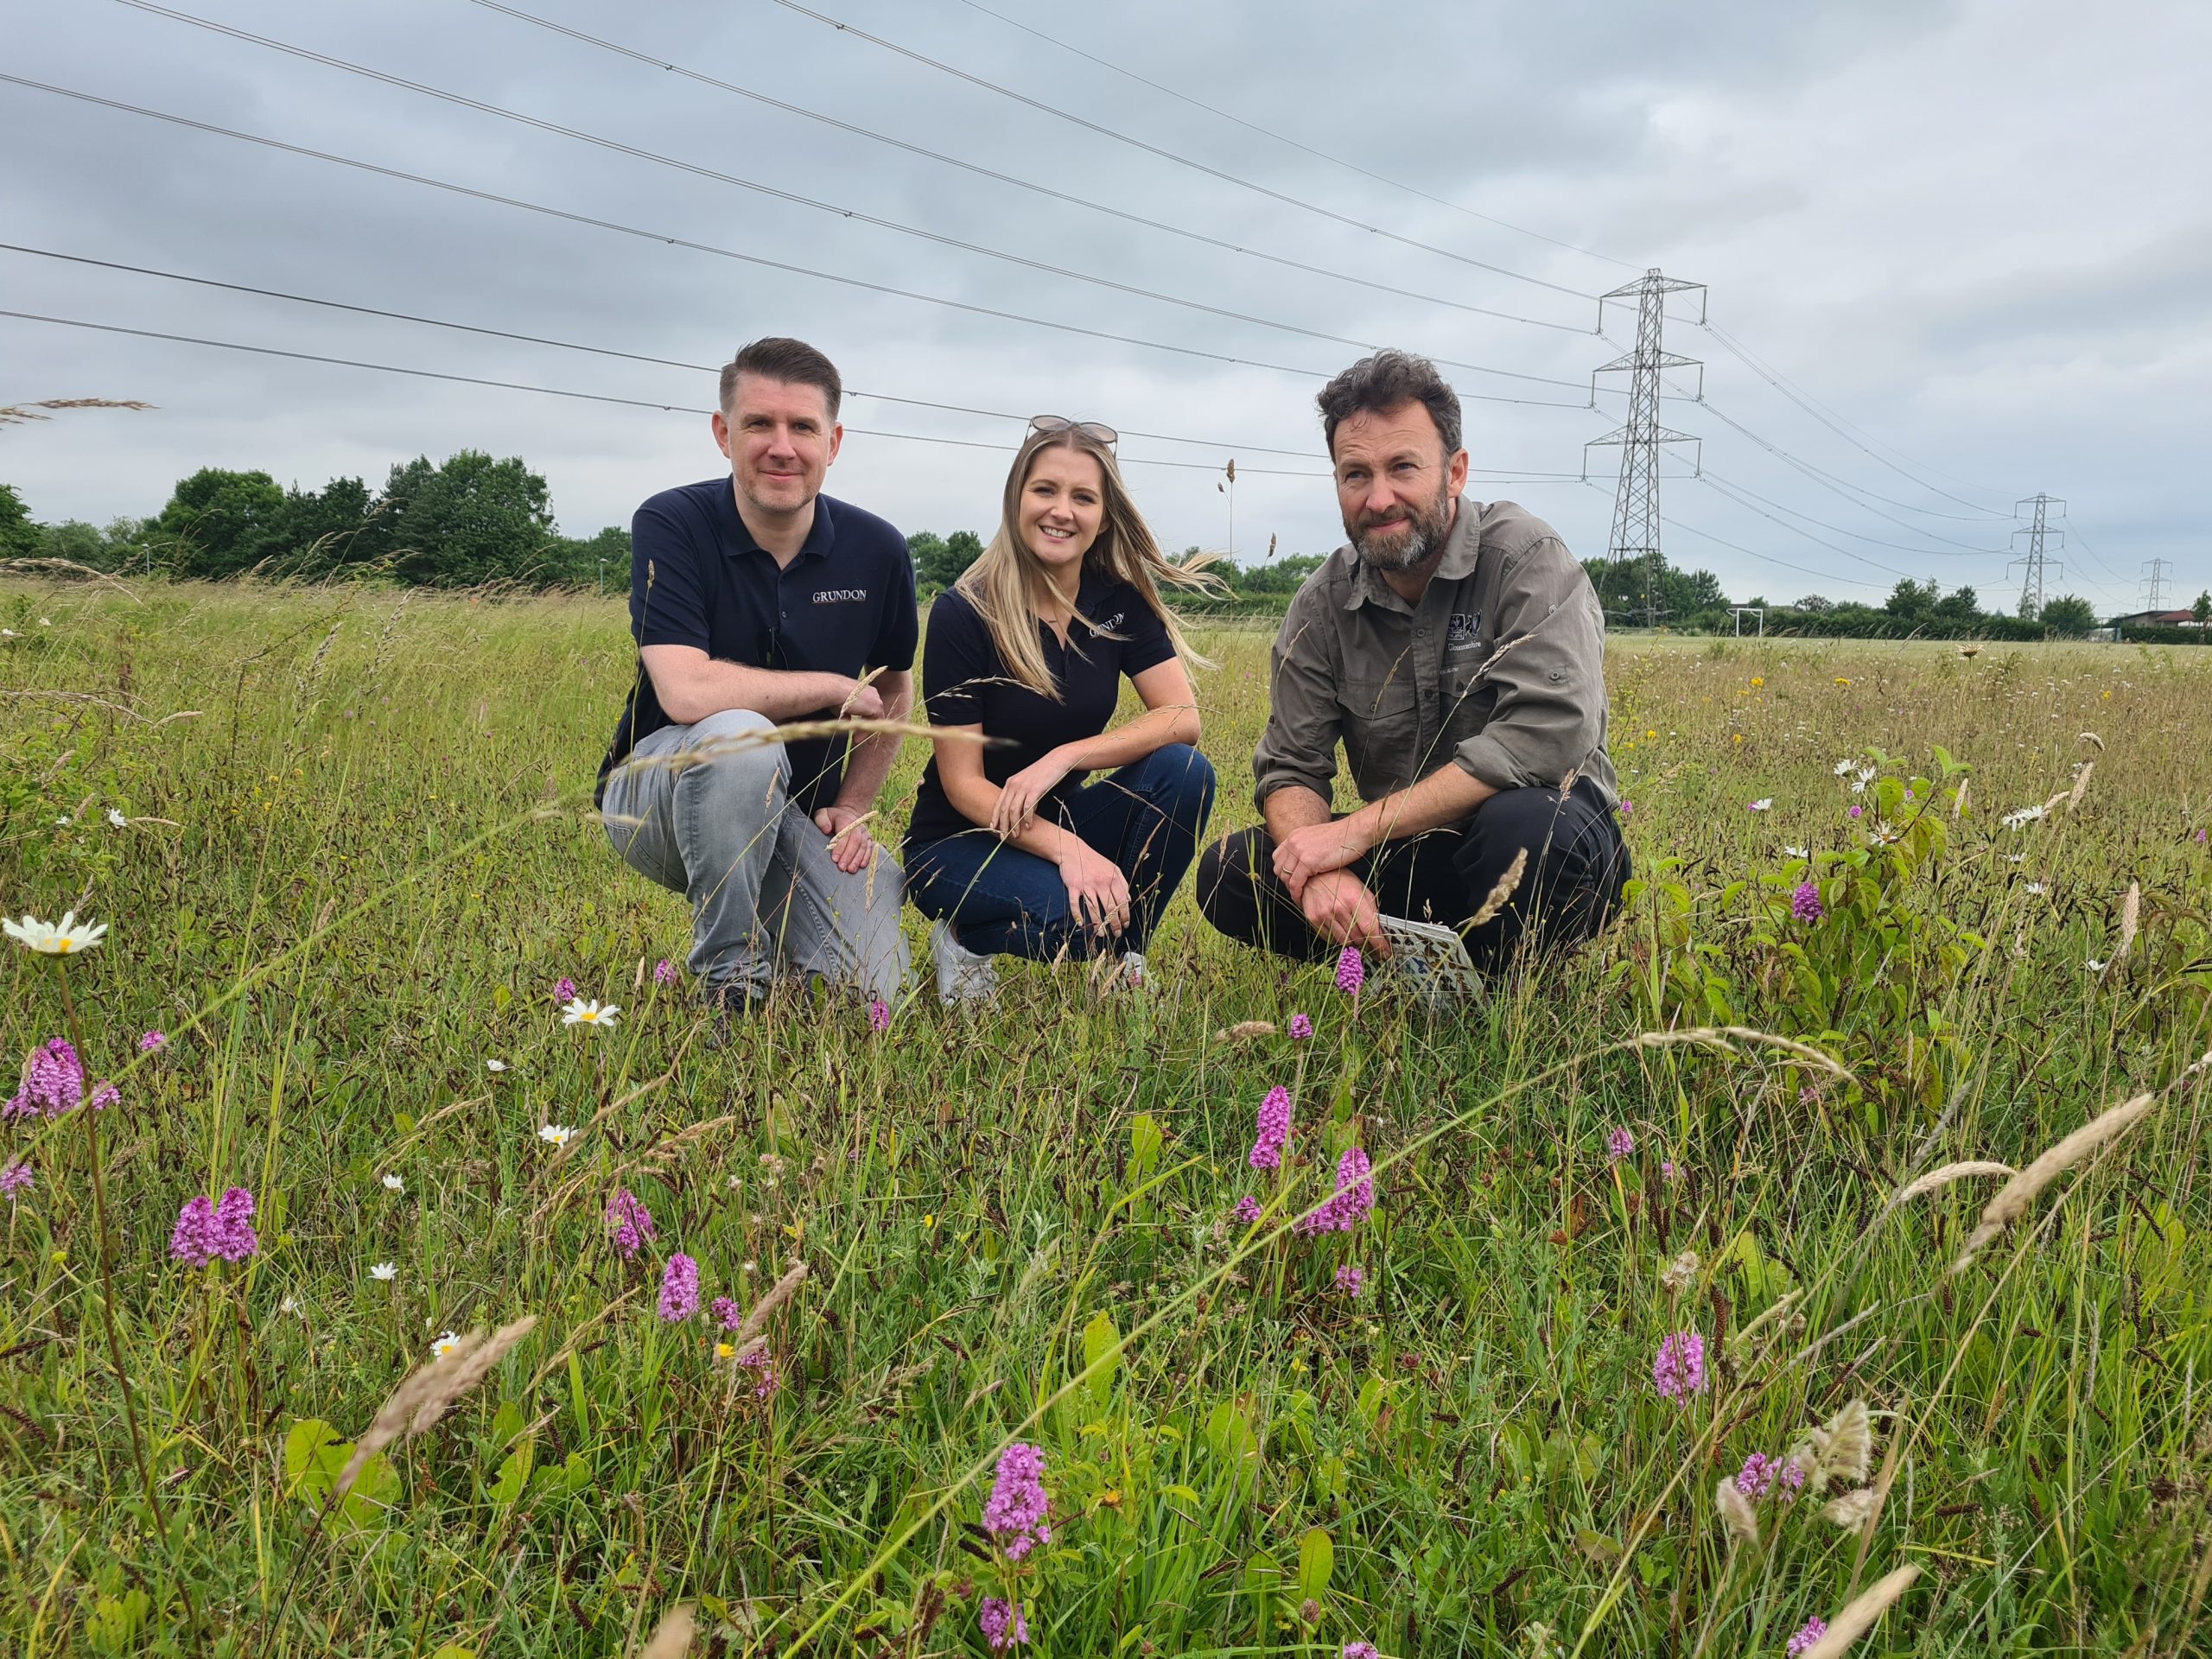 From left to right: Anthony Foxlee-Brown and Kirsti Santer of Grundon and Will Masefield, Project Manager at Gloucestershire Wildlife Trust, look at the thriving orchid species which can now be found at Cirencester's Kingshill meadow, one of seven locations around the town which have benefitted from funding worth £25,000 via the Landfill Communities Fund.